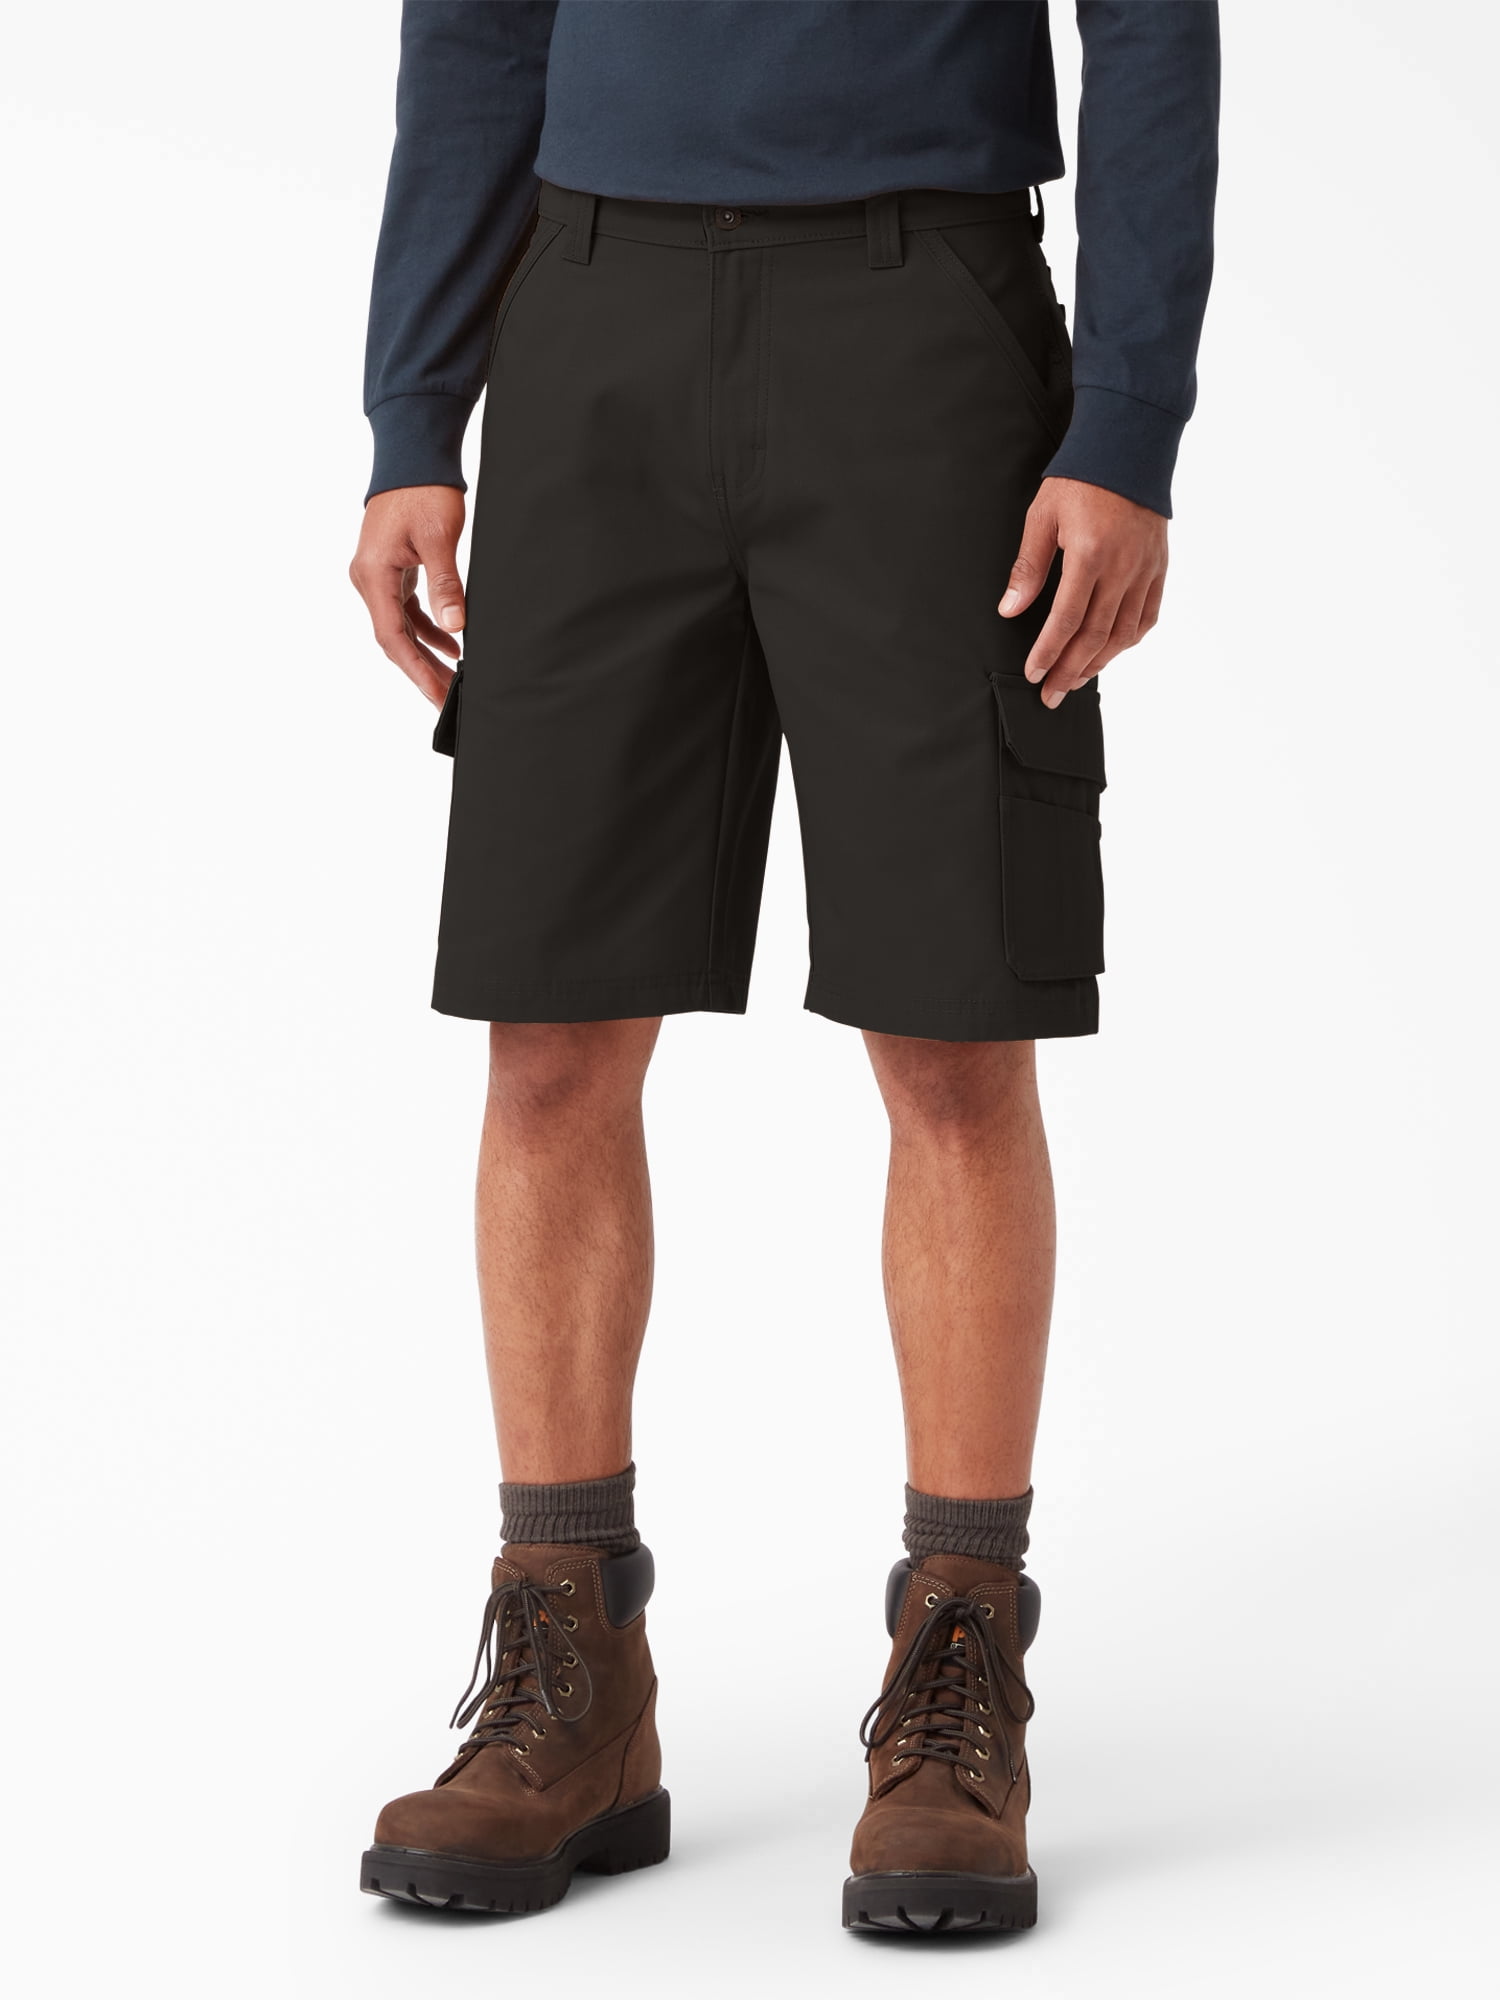 Craghoppers Mens Travel Stretch Kiwi Pro Active Long Shorts £29.99 Free Post 